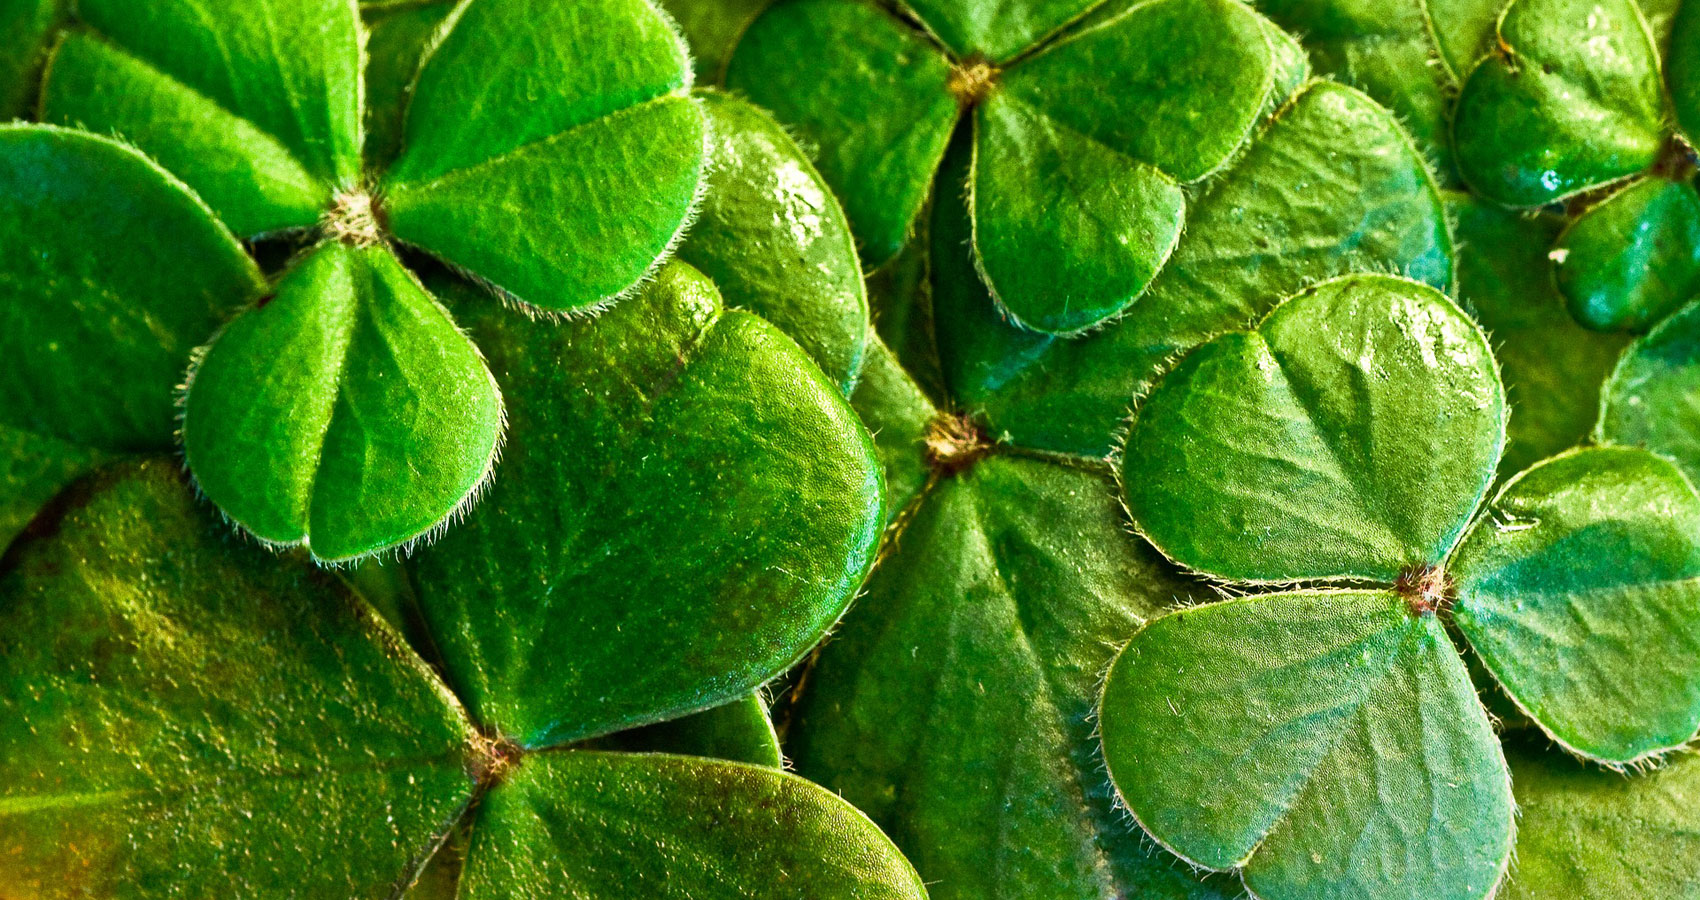 St. Patrick’s Day, a poem by Eliza Cook at Spillwords.com